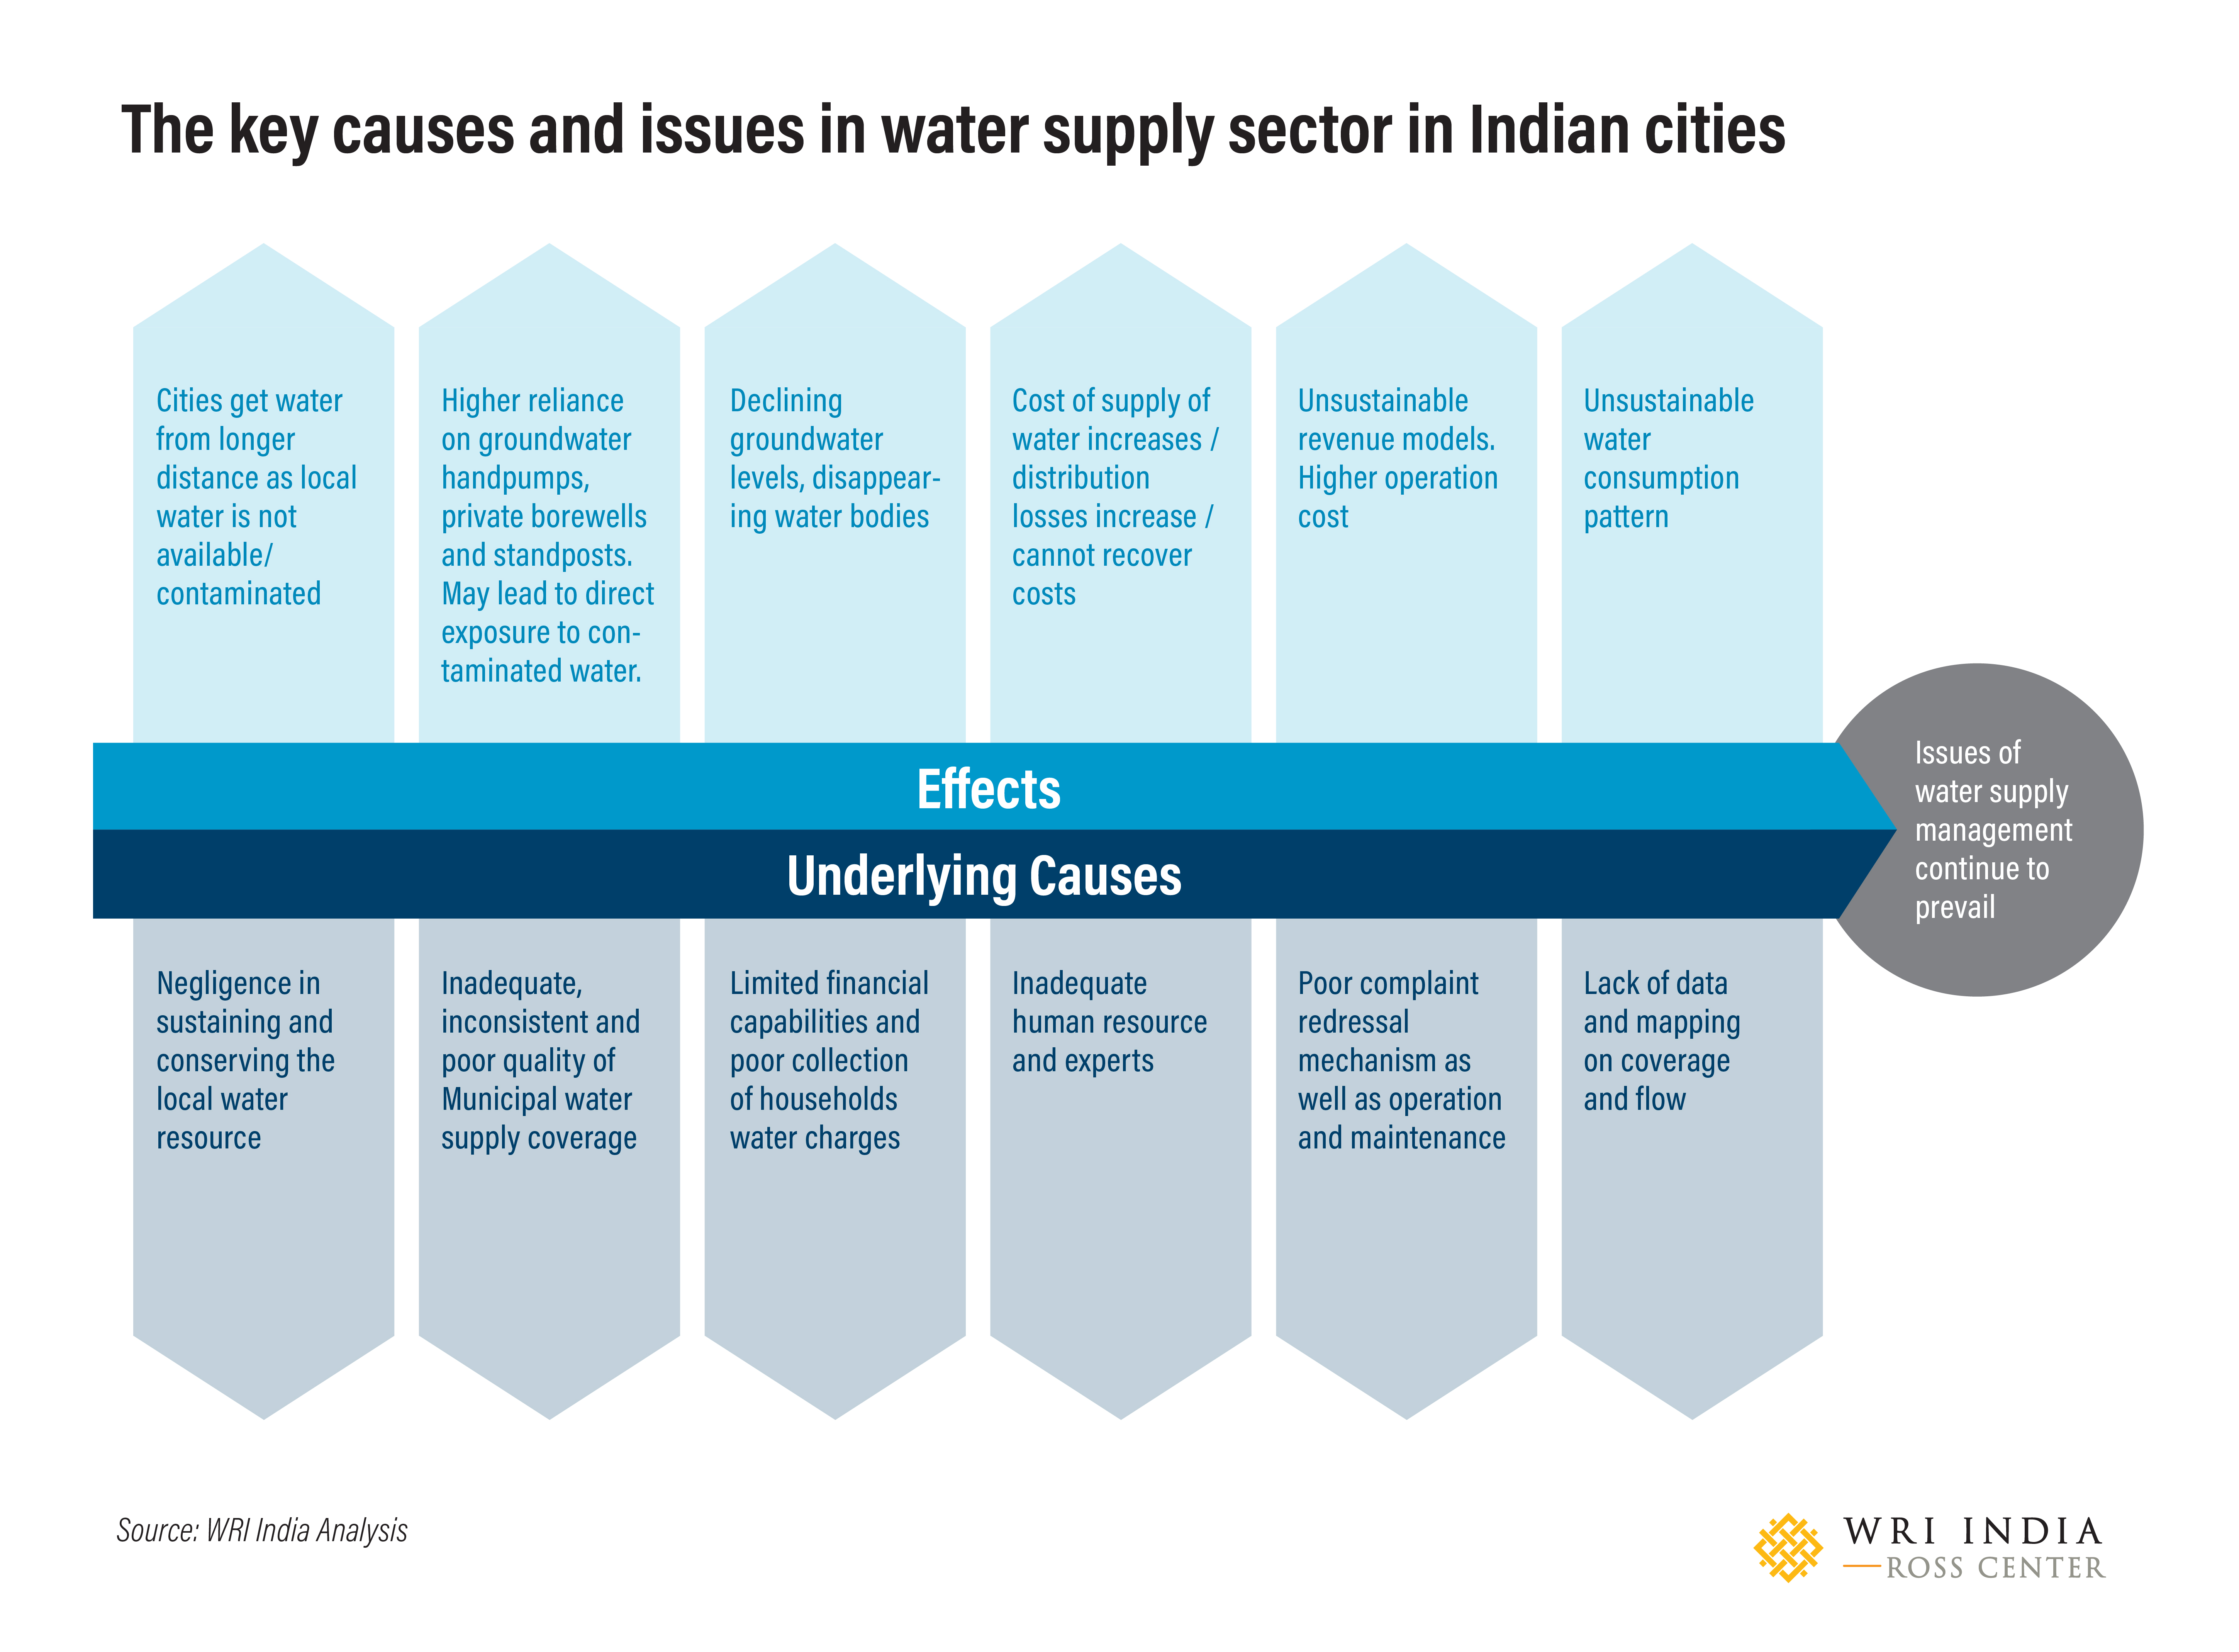 The key causes and issues in water supply sector in Indian cities